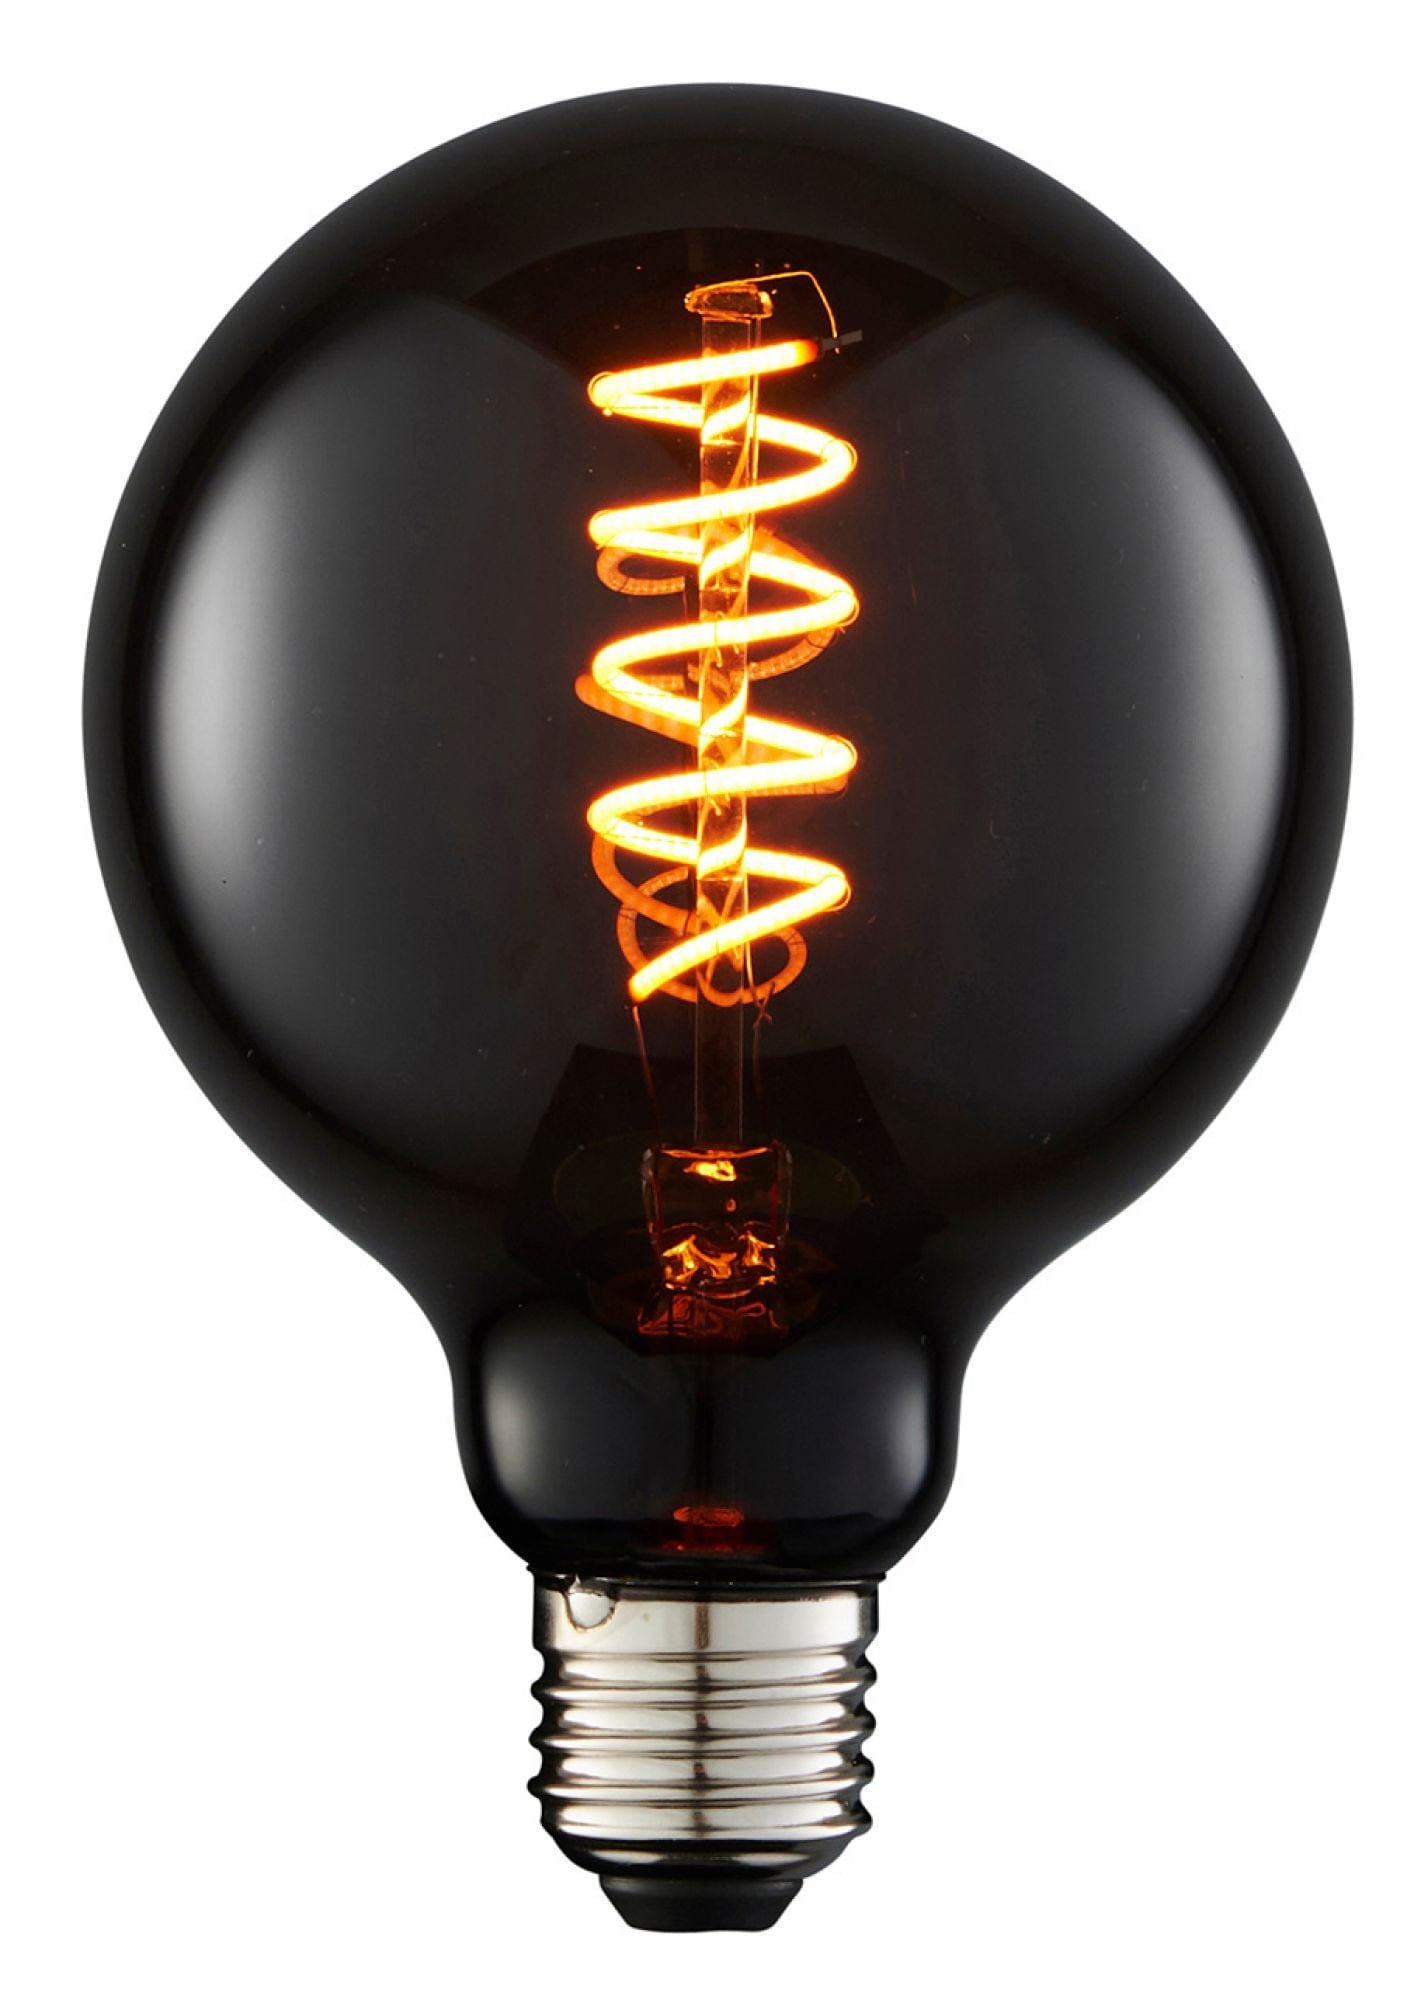 Priormade Bulb Globe Filament Bulb - Smoked Glass Spiral 95mm (LED)